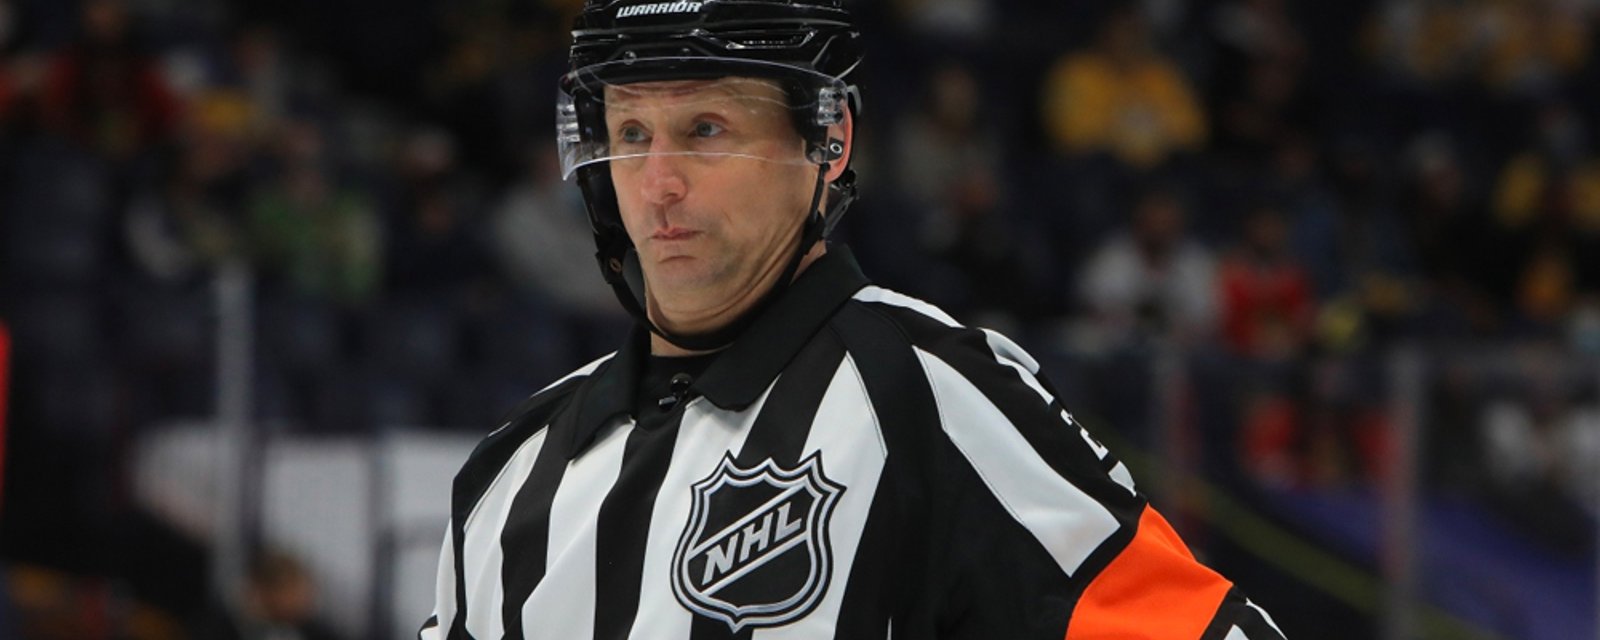 Referees to GMs: “Don't expect us to raise our arms, our job is to manage the game.”